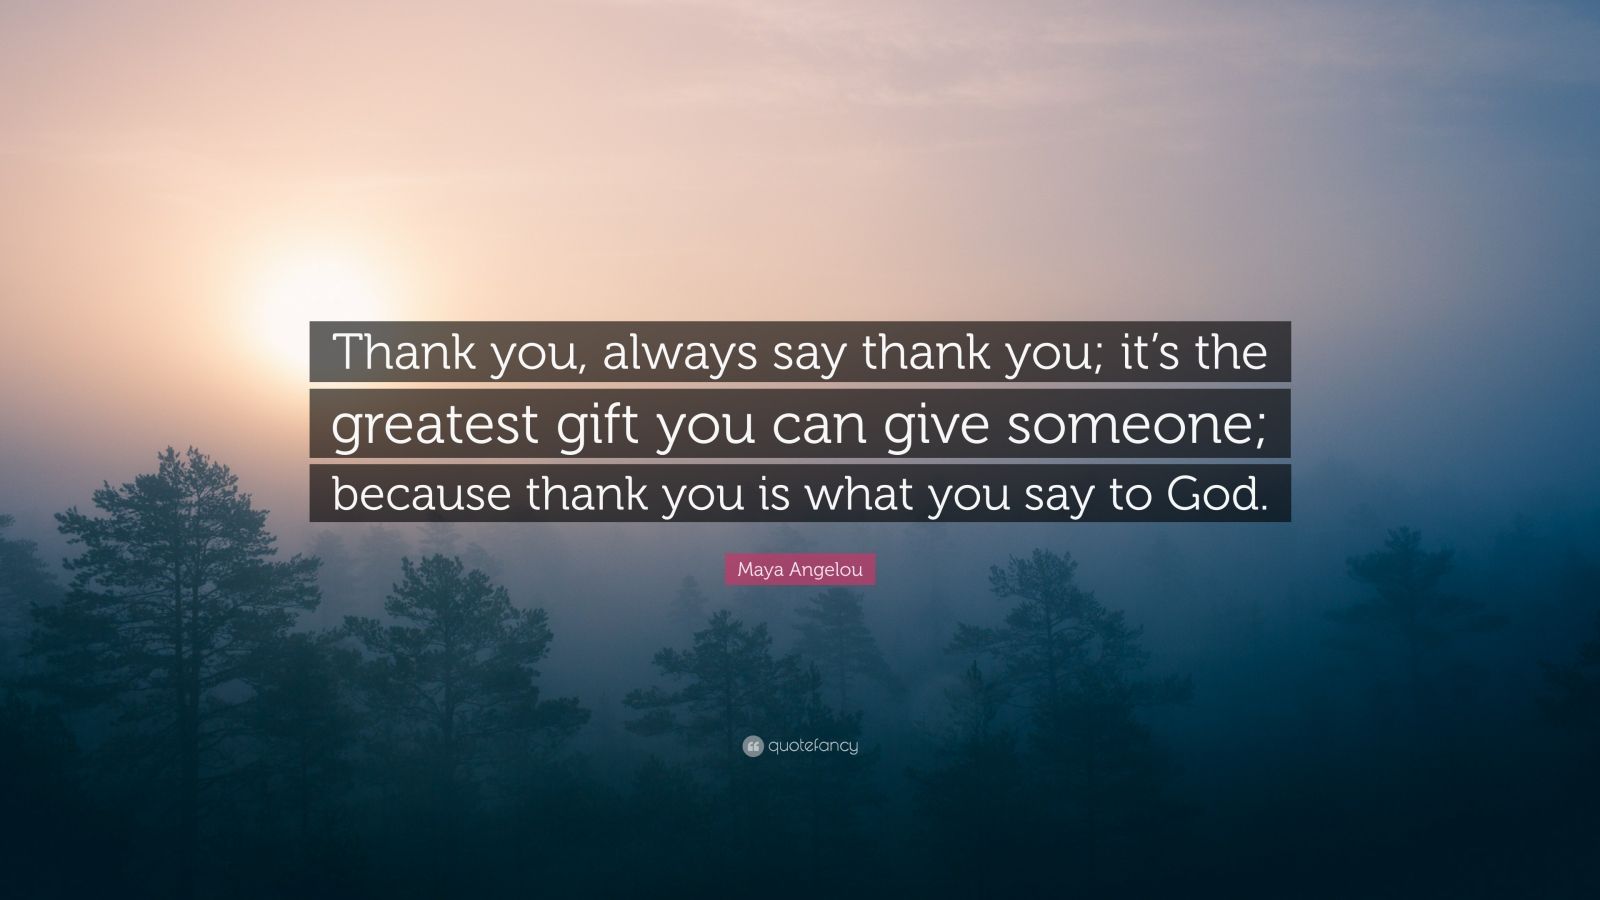 maya-angelou-quote-thank-you-always-say-thank-you-it-s-the-greatest-gift-you-can-give